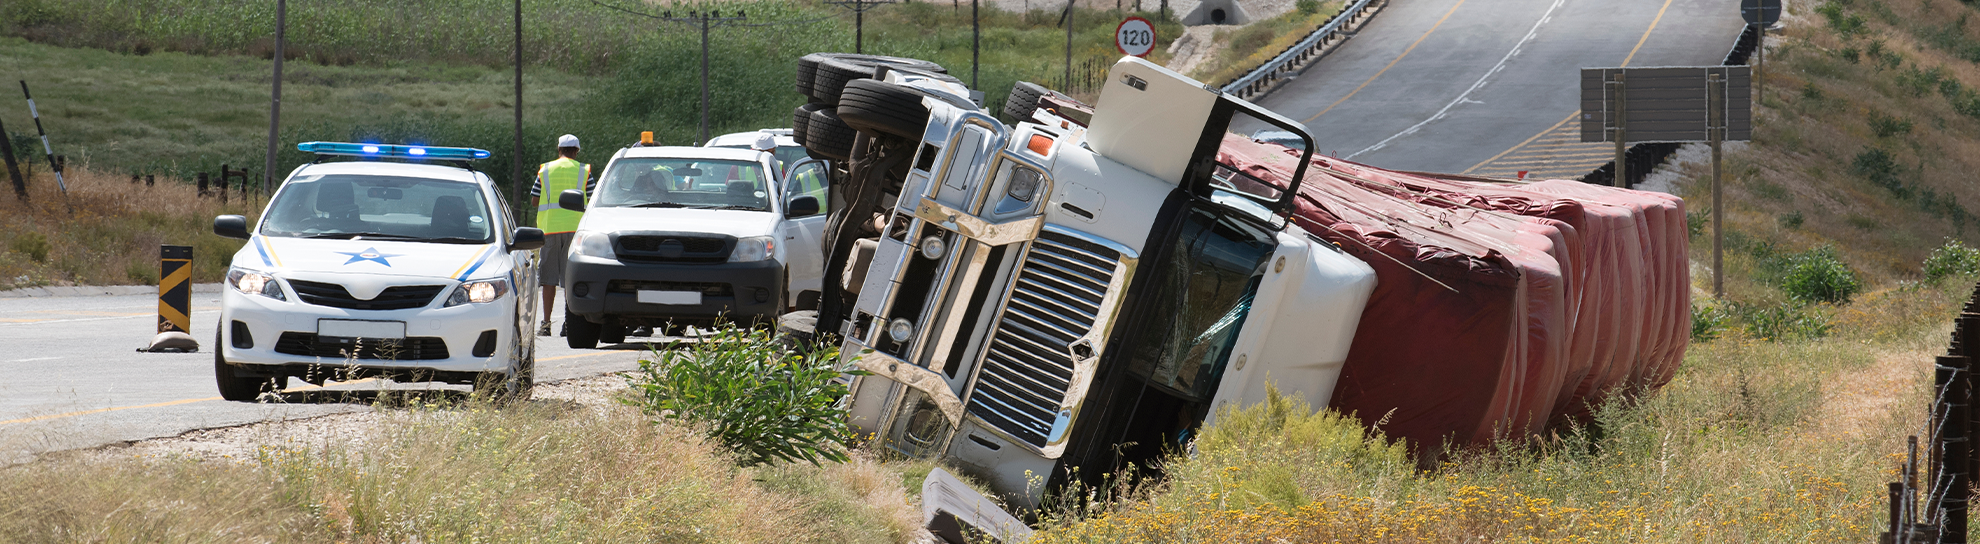 Overturned lorry on the Cape Namibia route at Citrusdal north of Cape Town South Africa